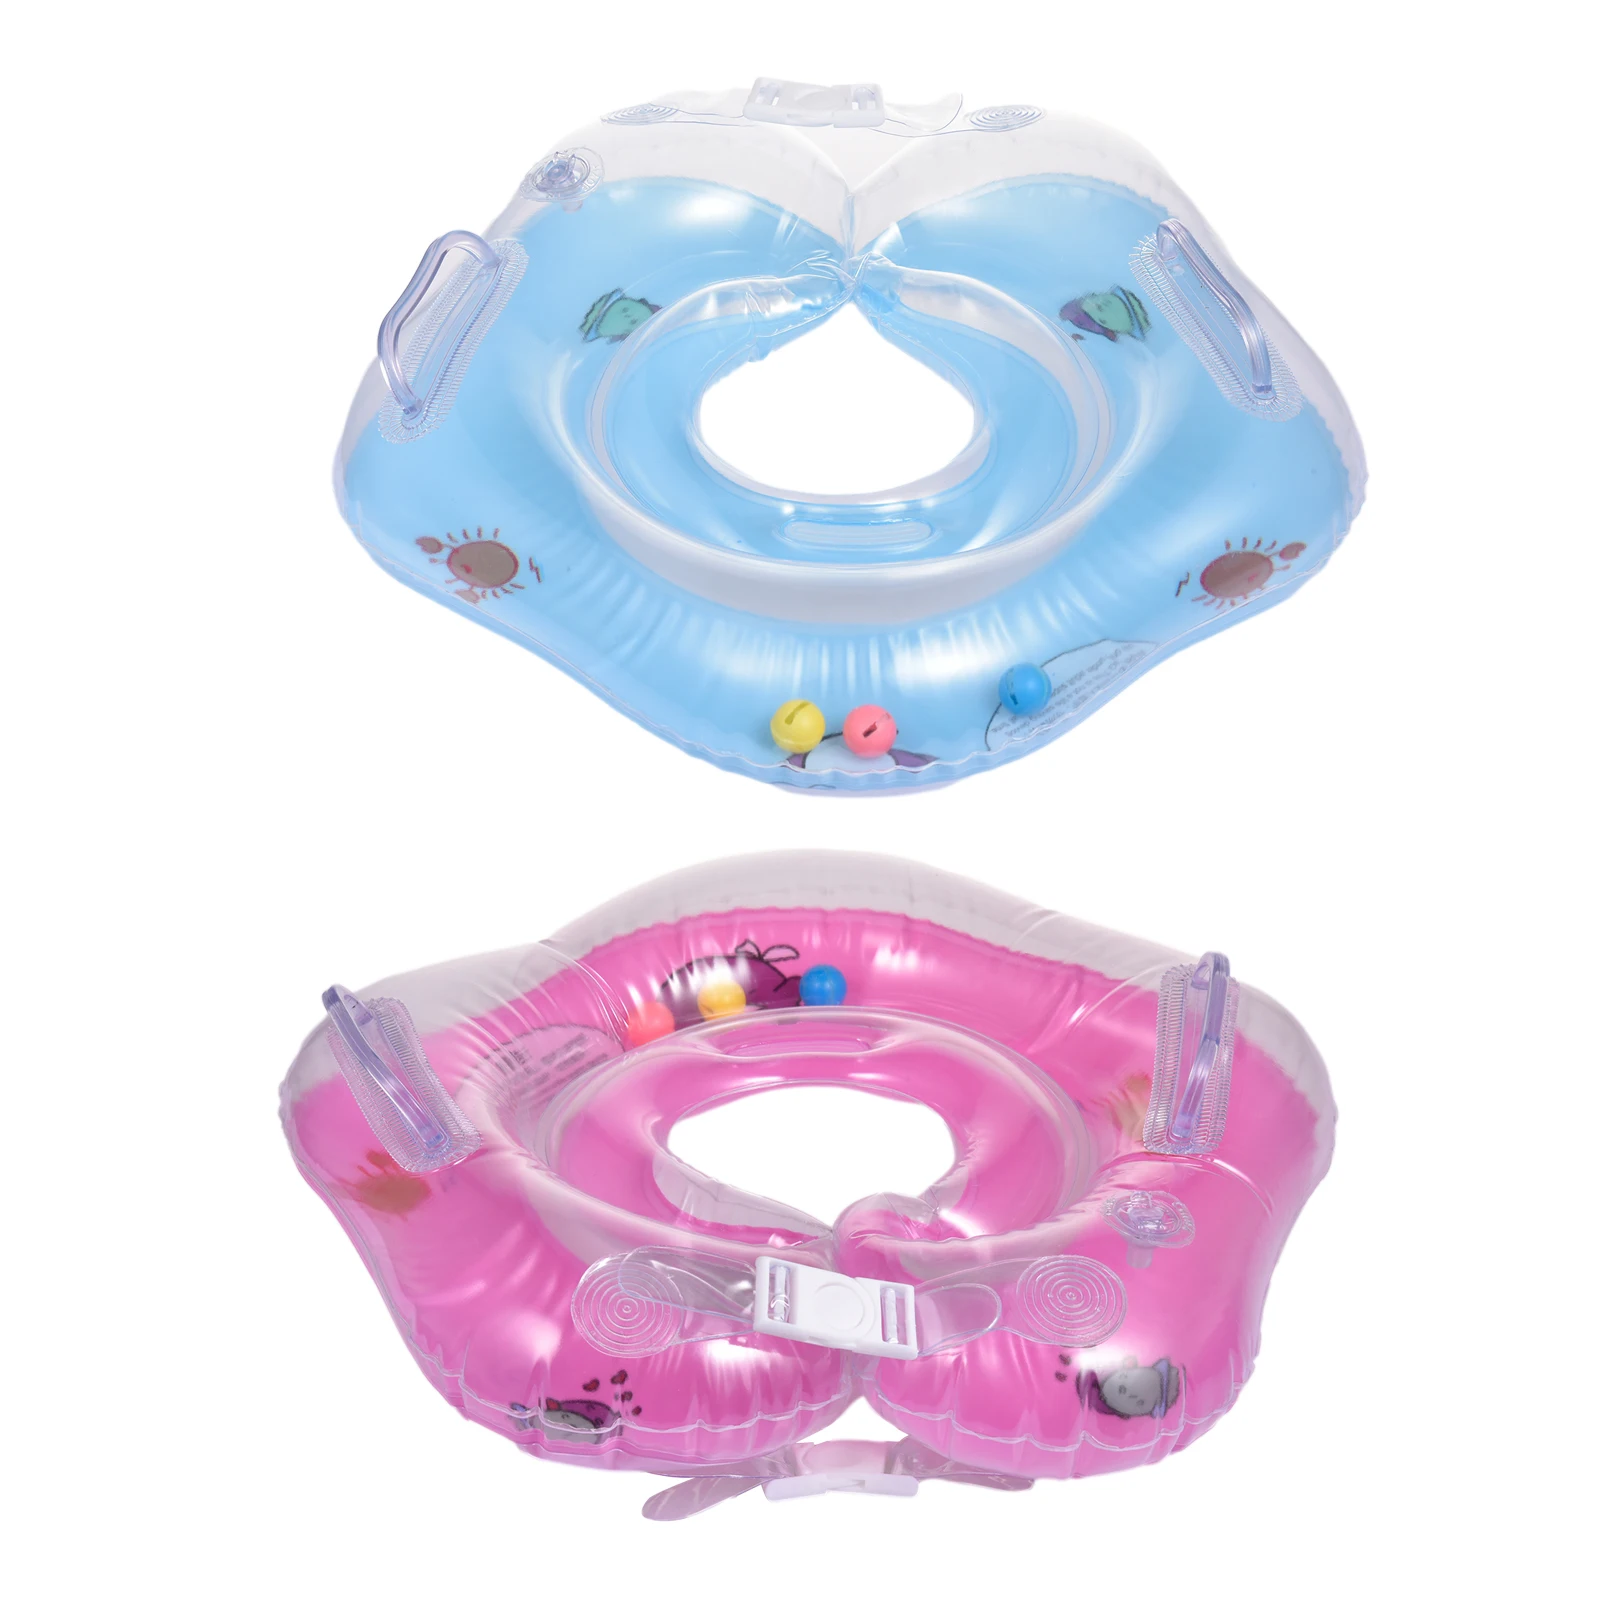 

Newborn Baby Kids Infant Swimming Protector Neck Float Ring Safety Life Buoy Life Saver Neck Collar Swimming Inflatable Protect